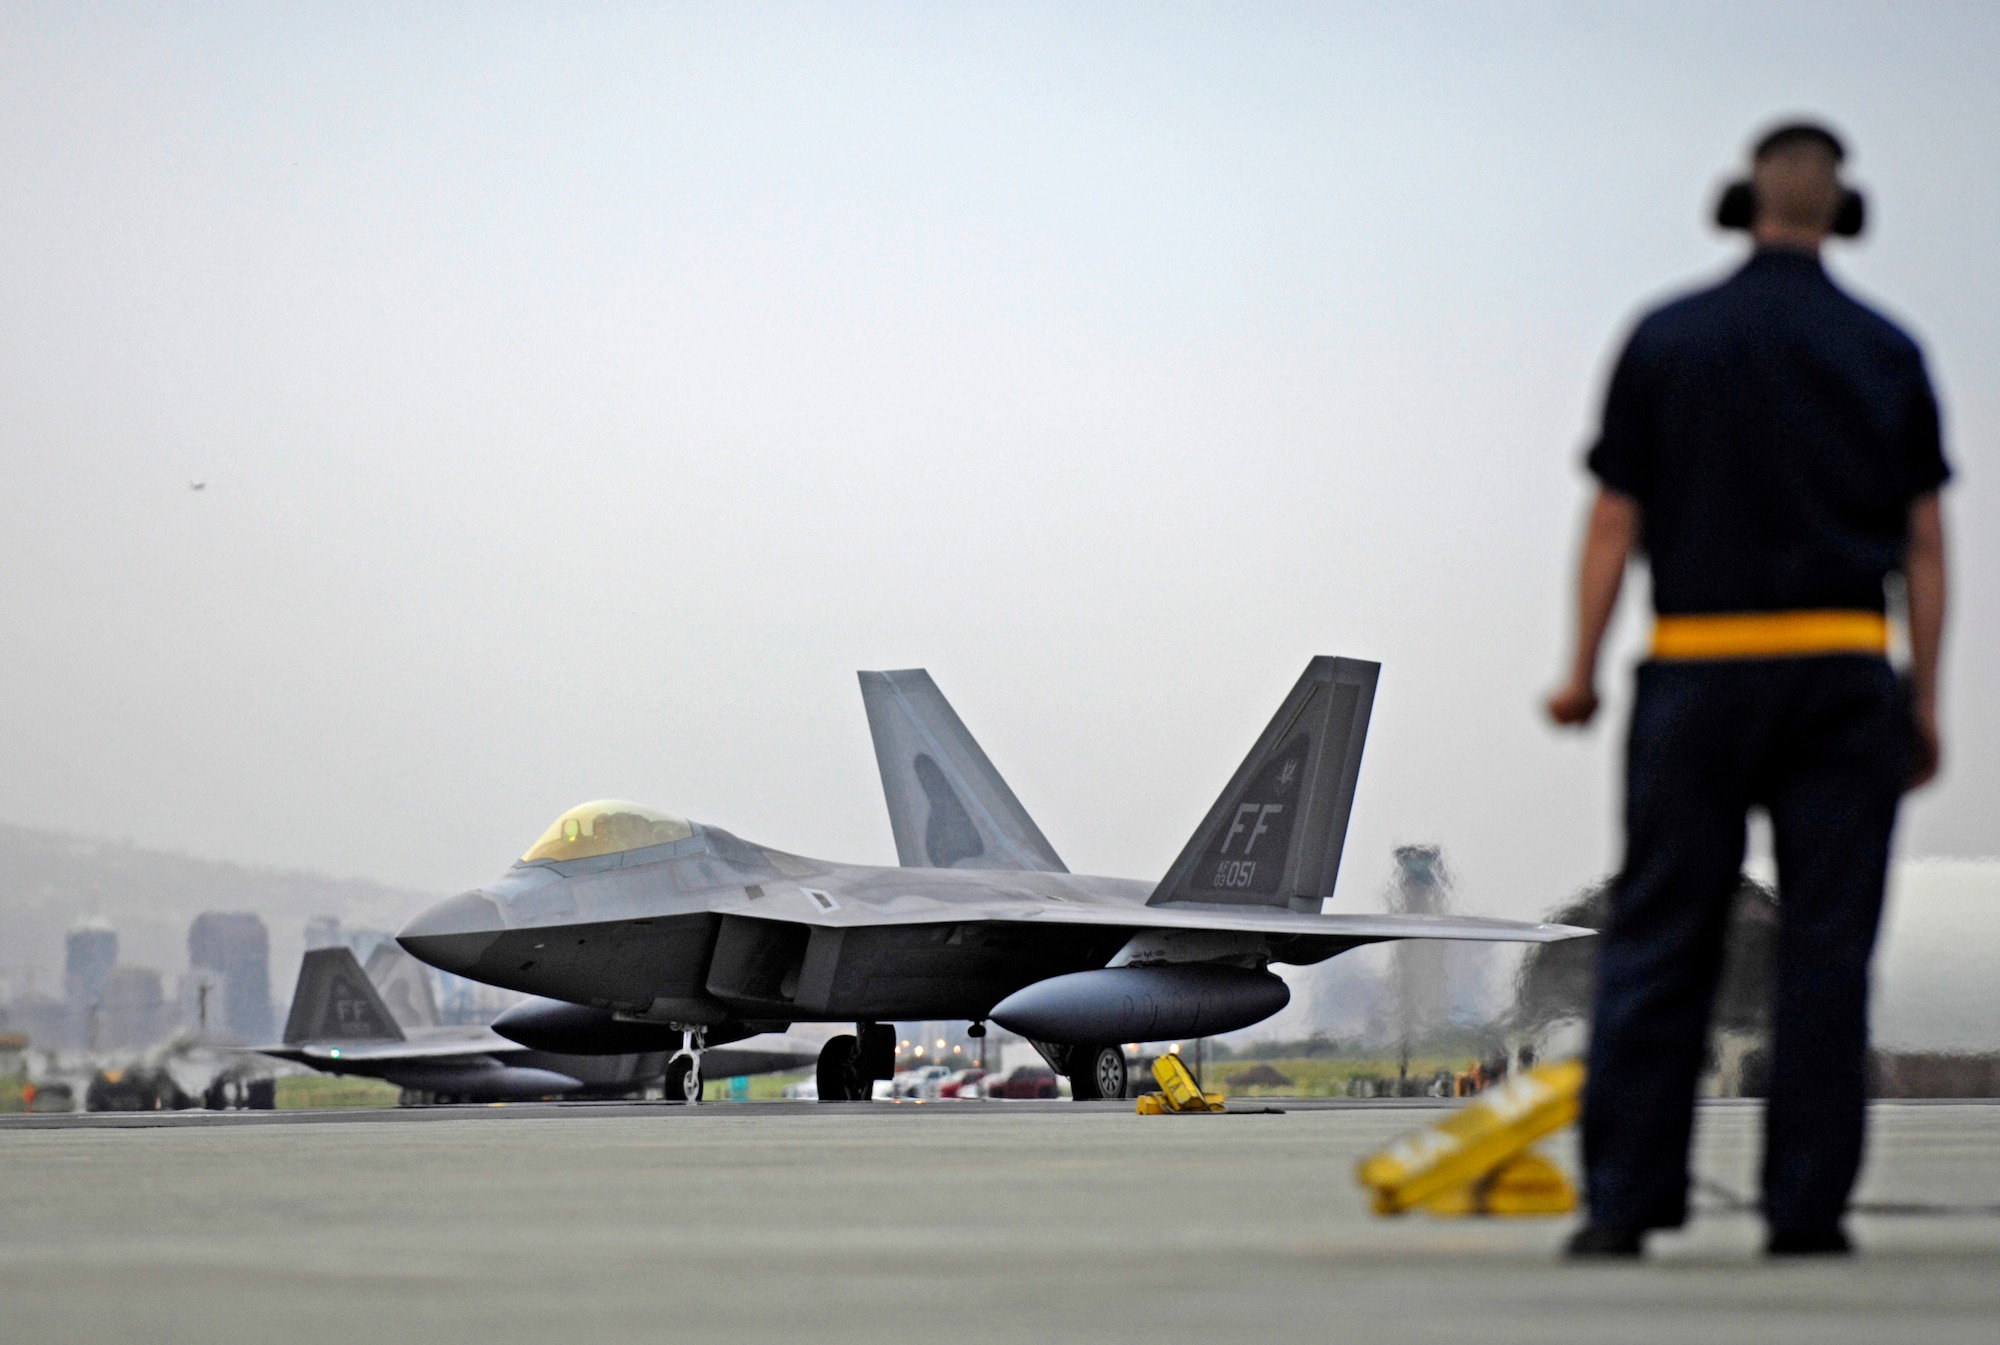 A crew chief waits to marshal a F-22 Raptor to its parking spot Feb. 7 at Hickam Air Force Base, Hawaii. The F-22s and more than 250 Airmen from the 27th Fighter Squadron at Langley Air Force Base, Va., are bound for Kadena Air Base, Japan, for the aircraft's first overseas operational deployment. (U.S. Air Force photo/Tech. Sgt. Shane A. Cuomo) 